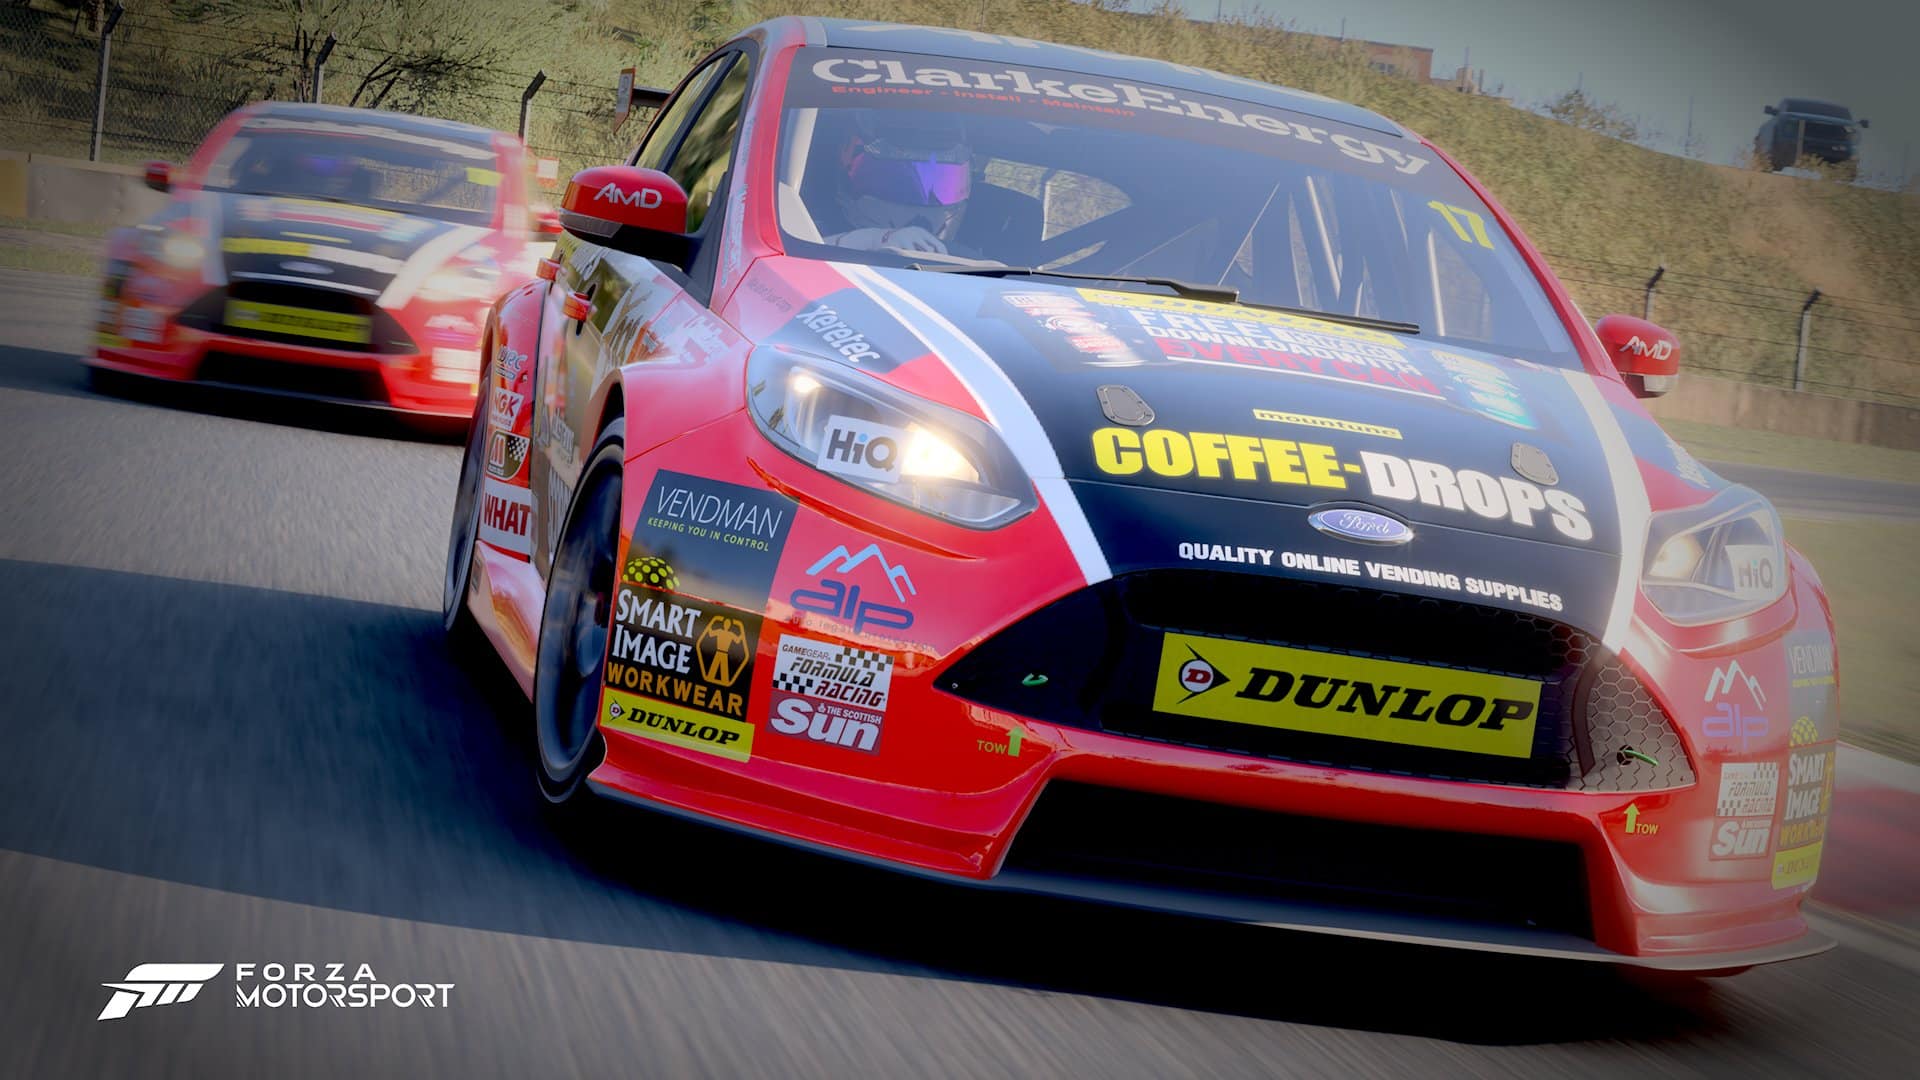 Forza Motorsport 5' Reviews: Most Realistic Racing Game yet